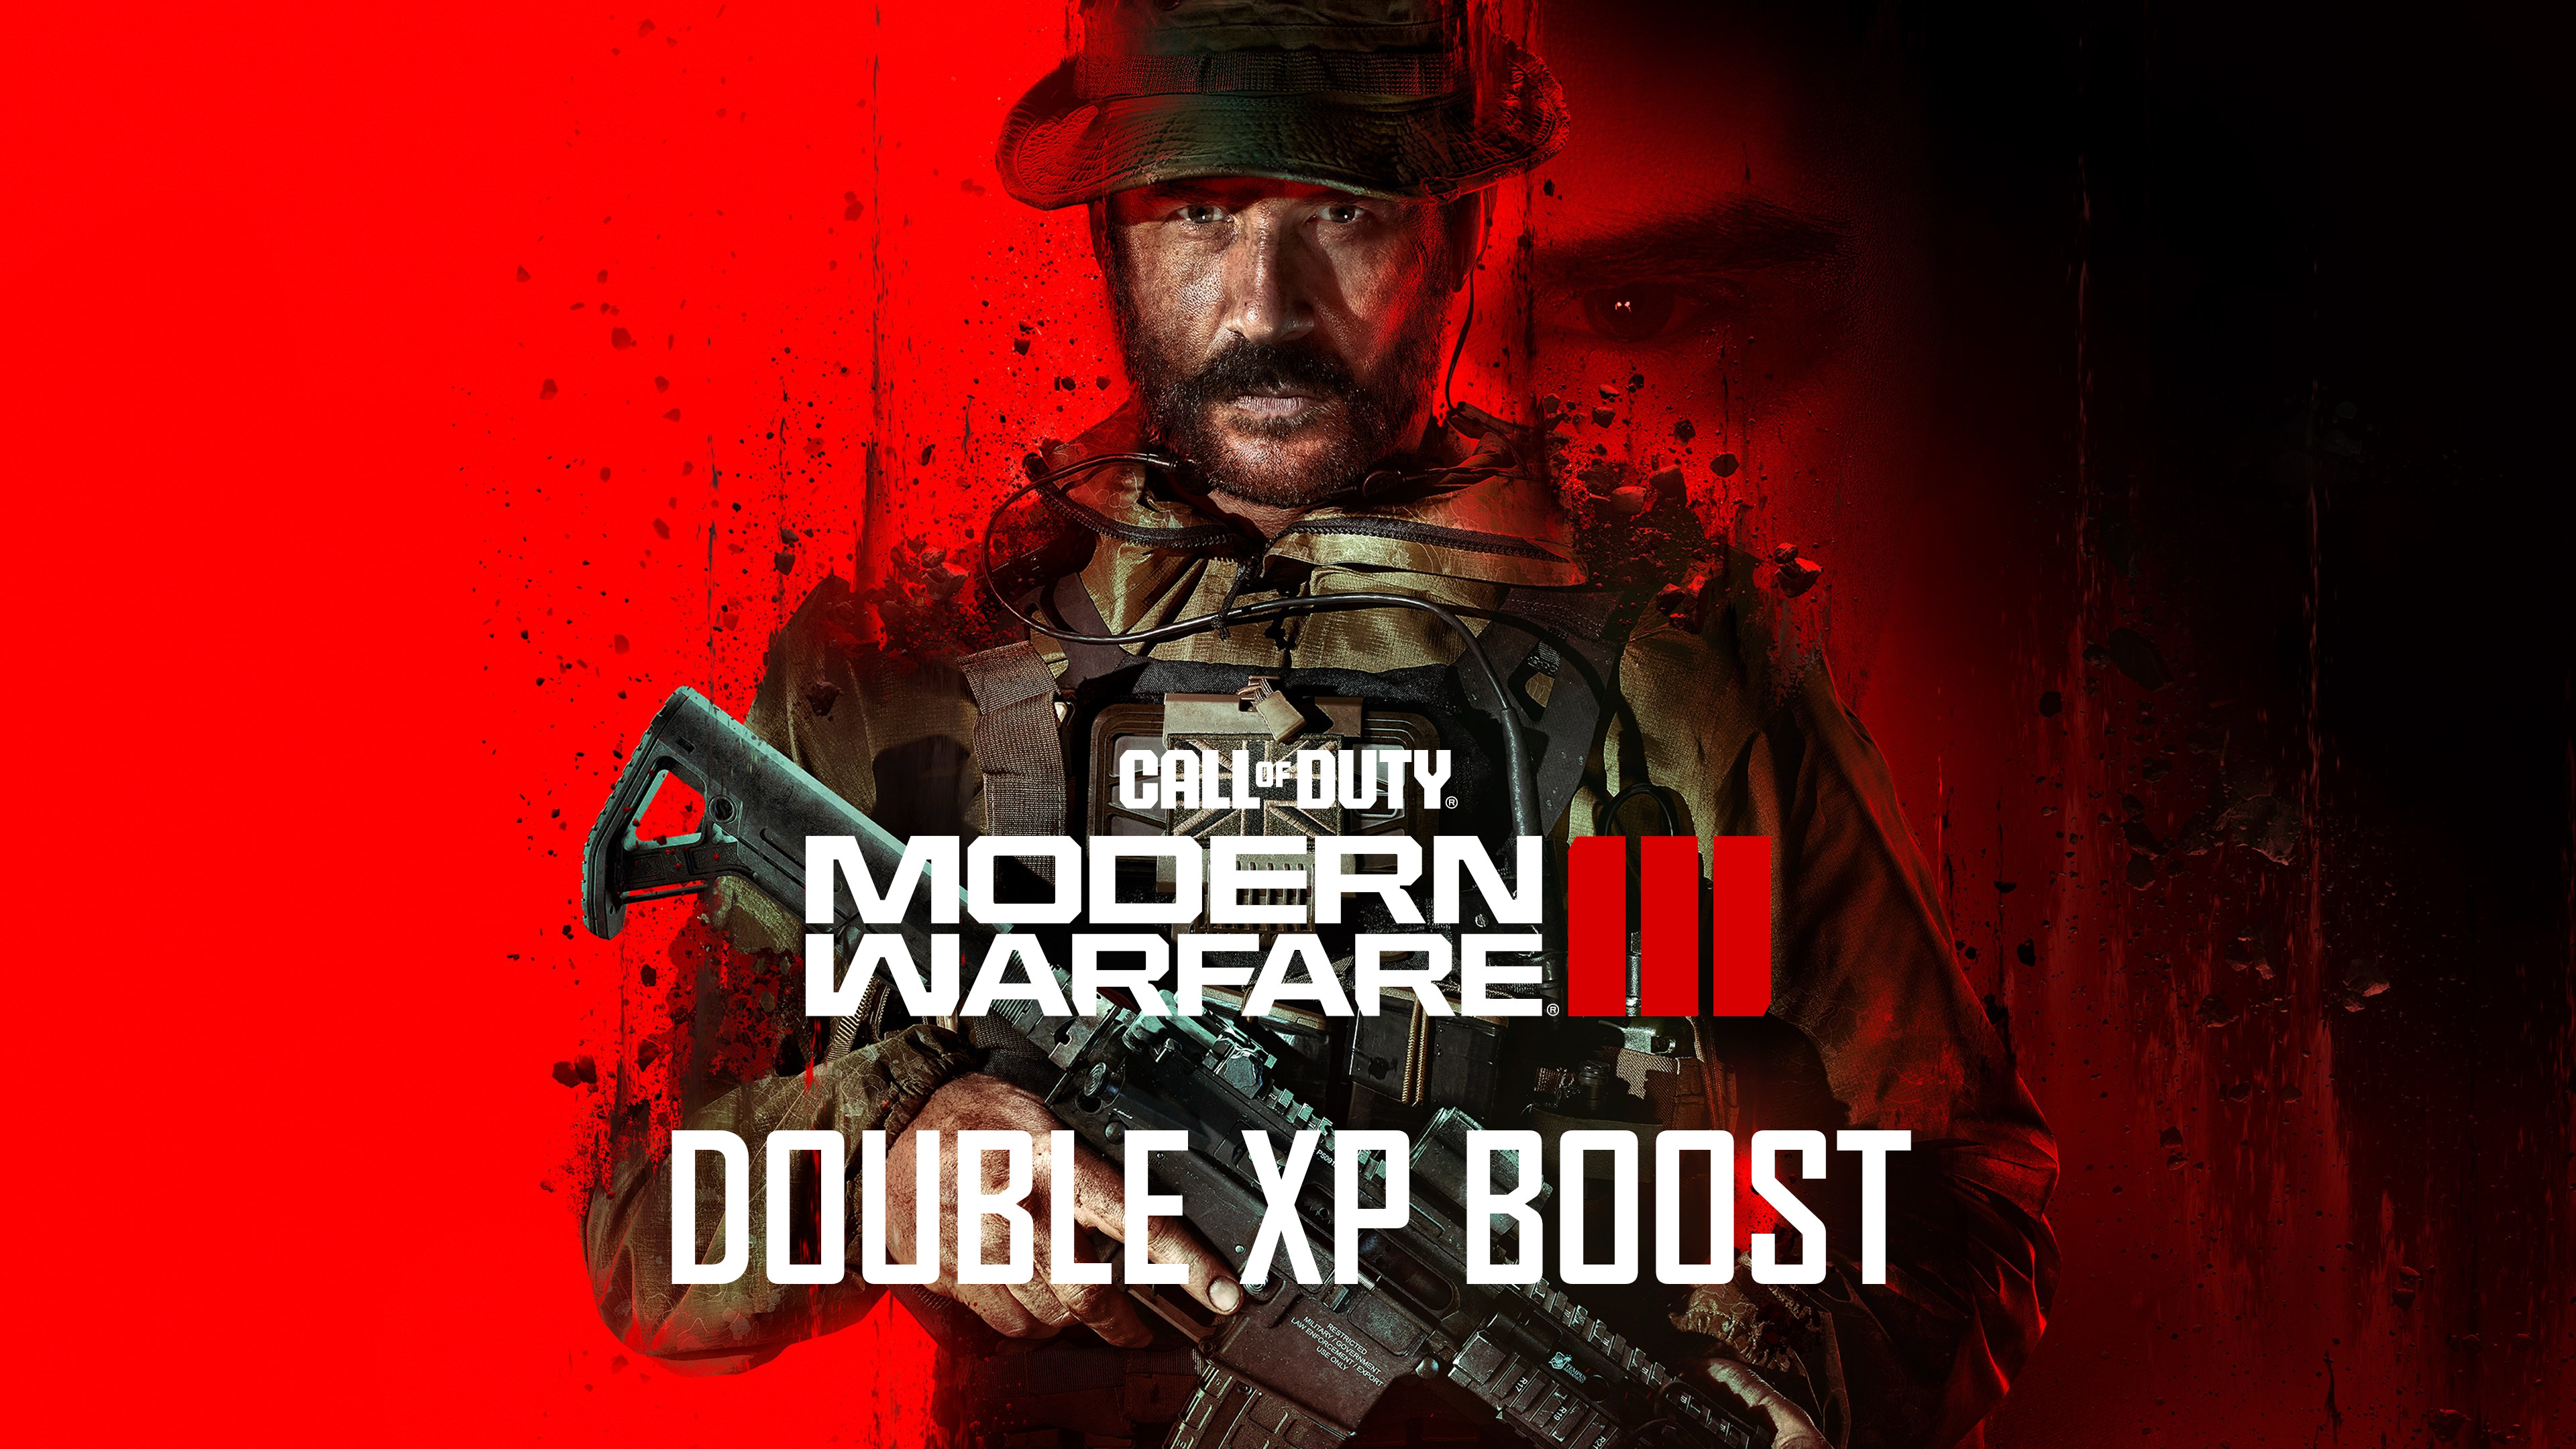 Call of Duty: Modern Warfare III - 5 Hours Double XP Boost PC/PS4/PS5/XBOX One/Series X|S CD Key [$ 4.52]